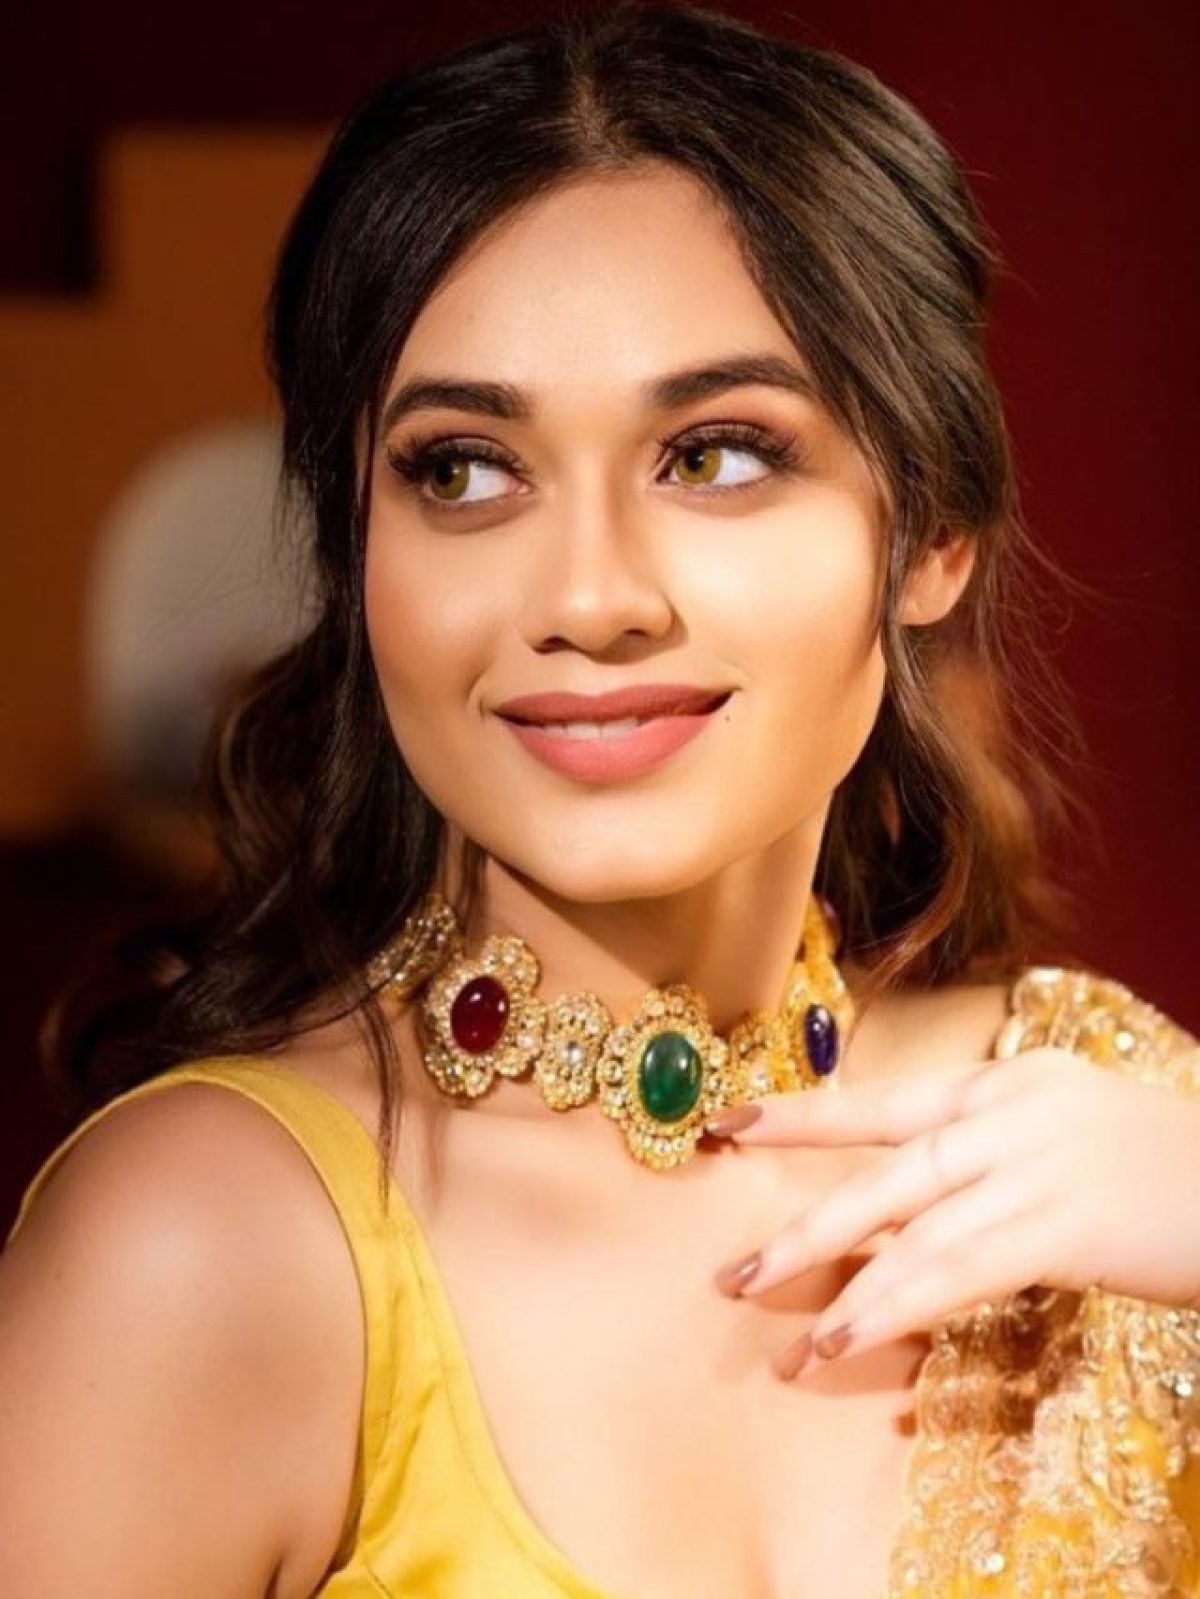 Outfits To Steal From Jannat Zubair Rahmani For This Wedding Season